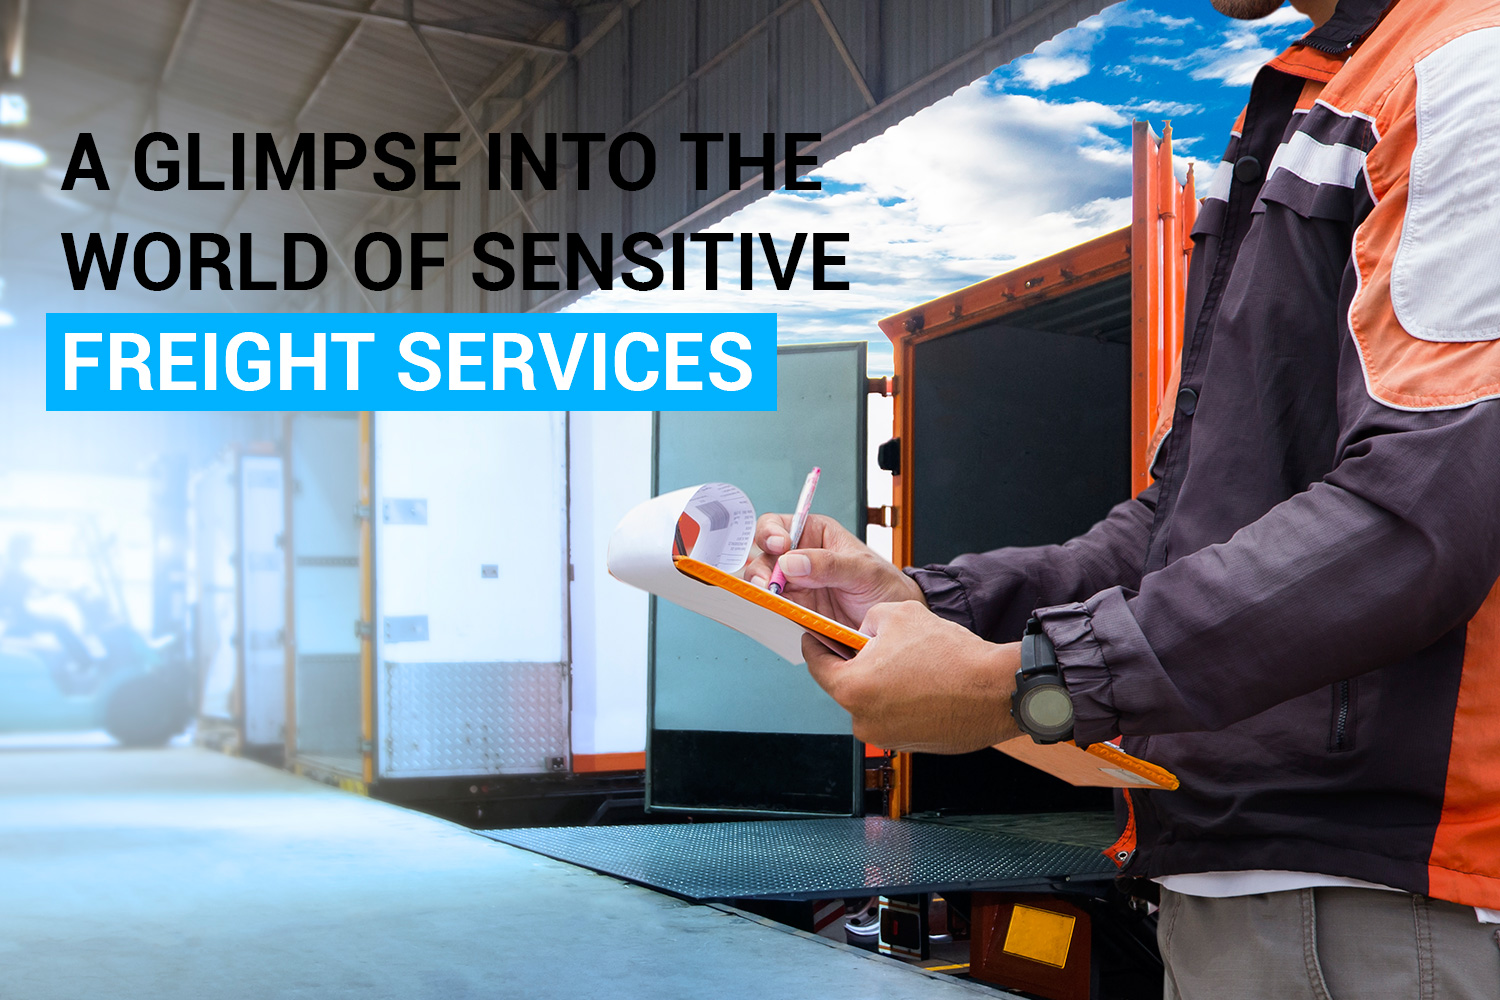 Melbourne’s Gentle Touch – A Glimpse Into the World of Sensitive Freight Services